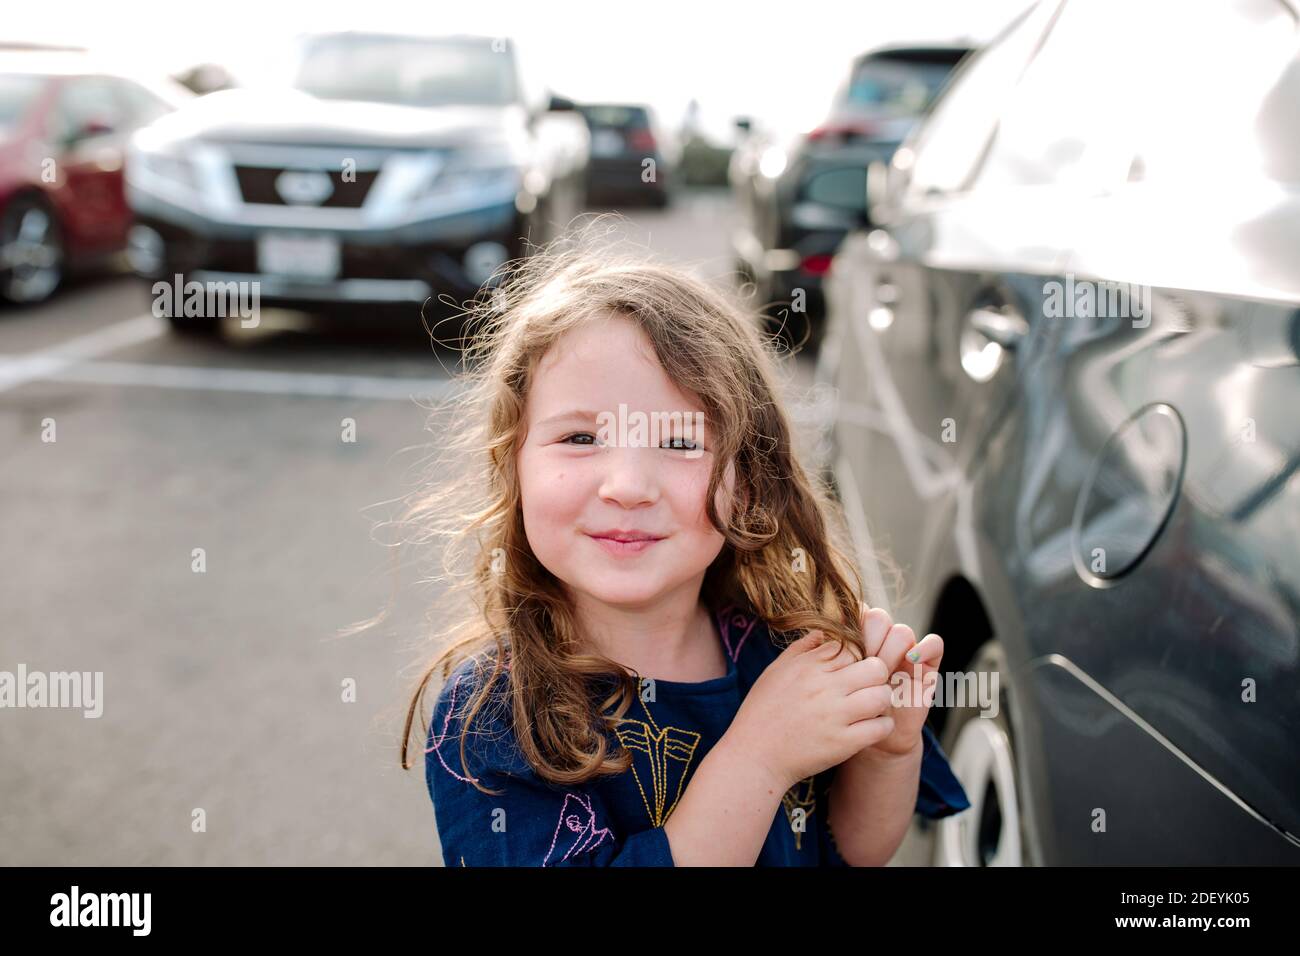 Smiling 3 yr old girl twining long hair standing in parking lot Stock Photo